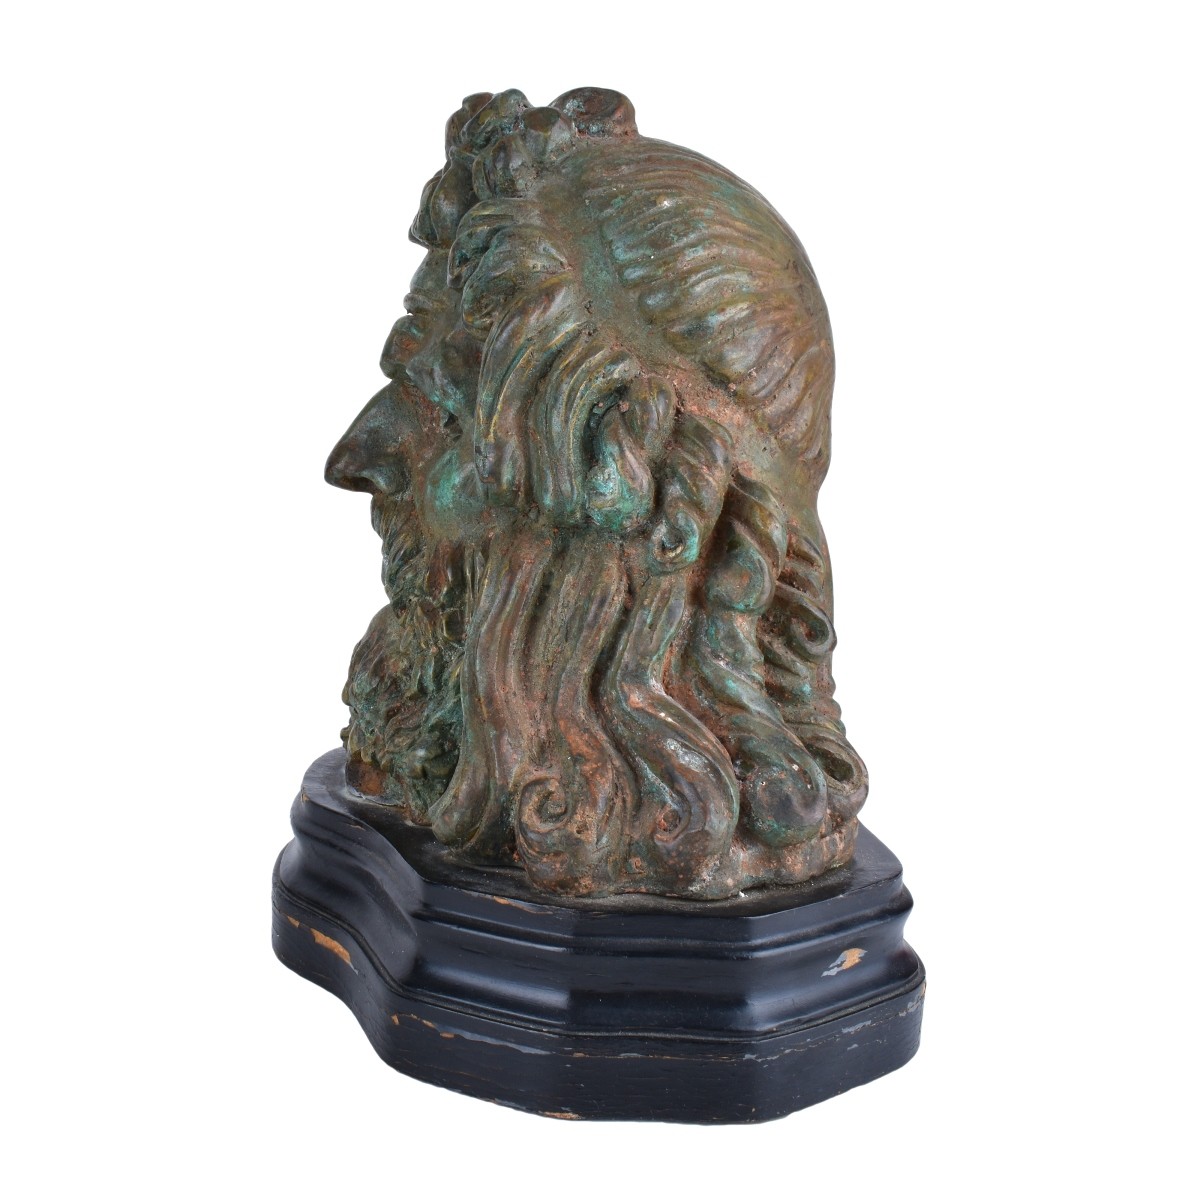 Antique Bronze Bust of Male Figure on Wooden Base